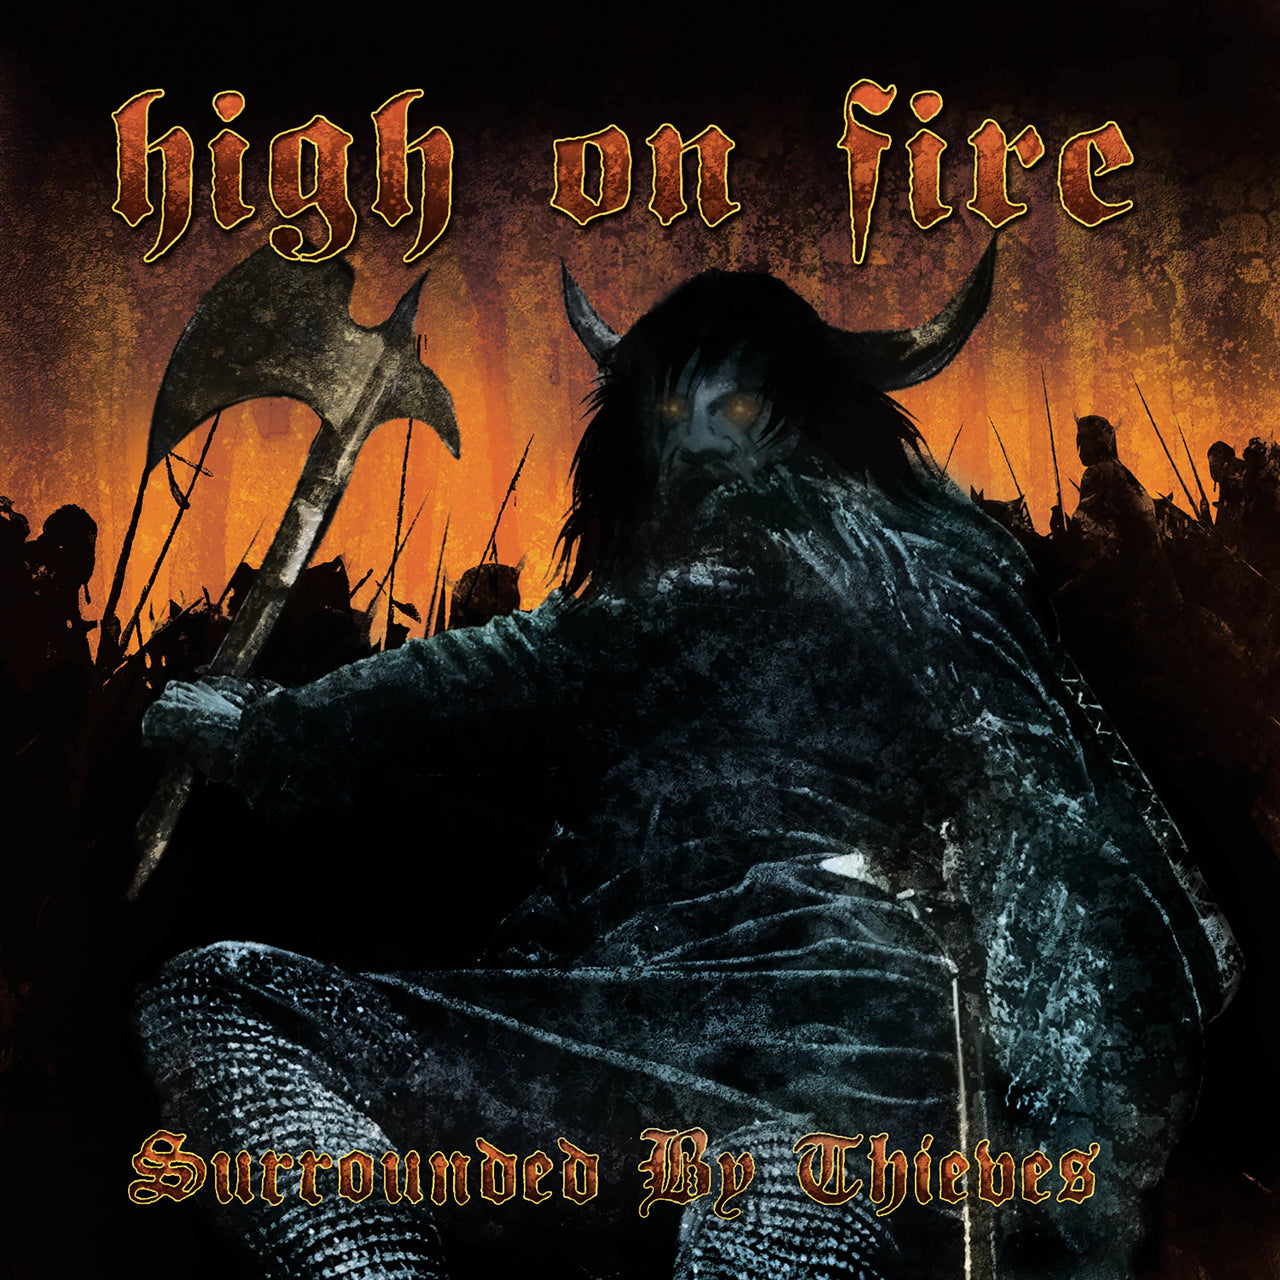 Buy – High on Fire "Surrounded By Thieves" 2x12" – Band & Music Merch – Cold Cuts Merch